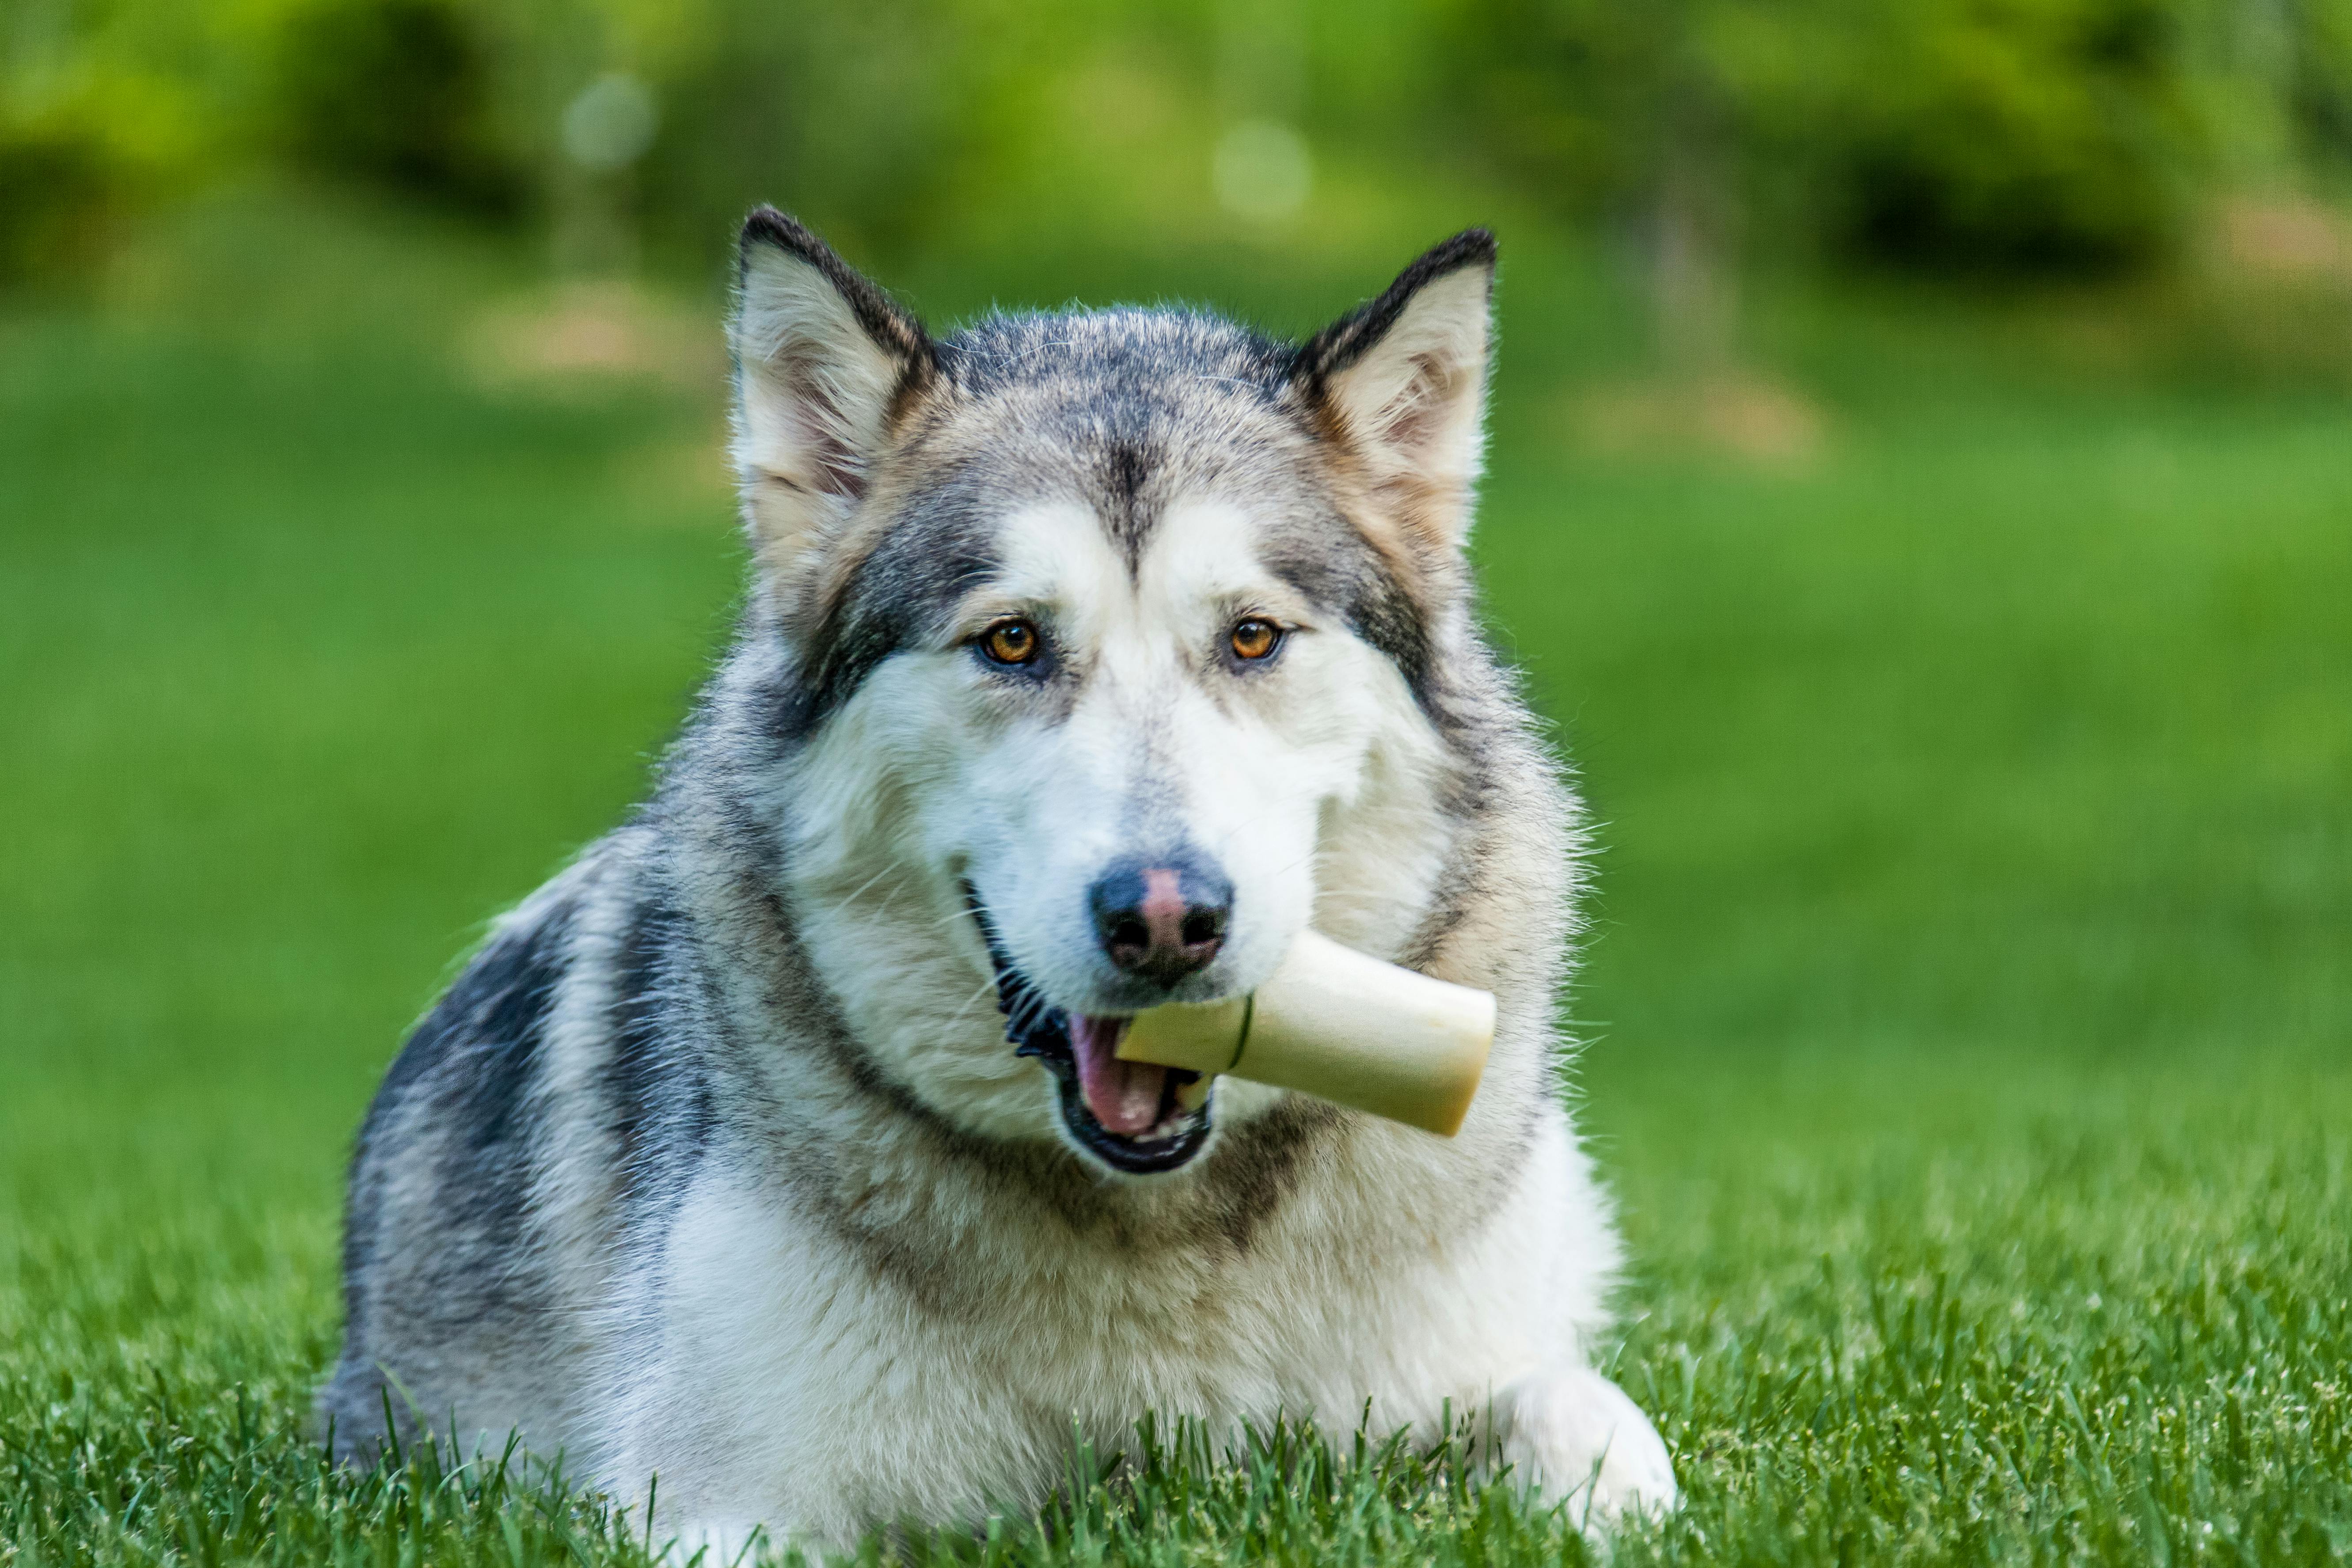 white and black siberian husky puppy biting white ice cream cone on green grass field during